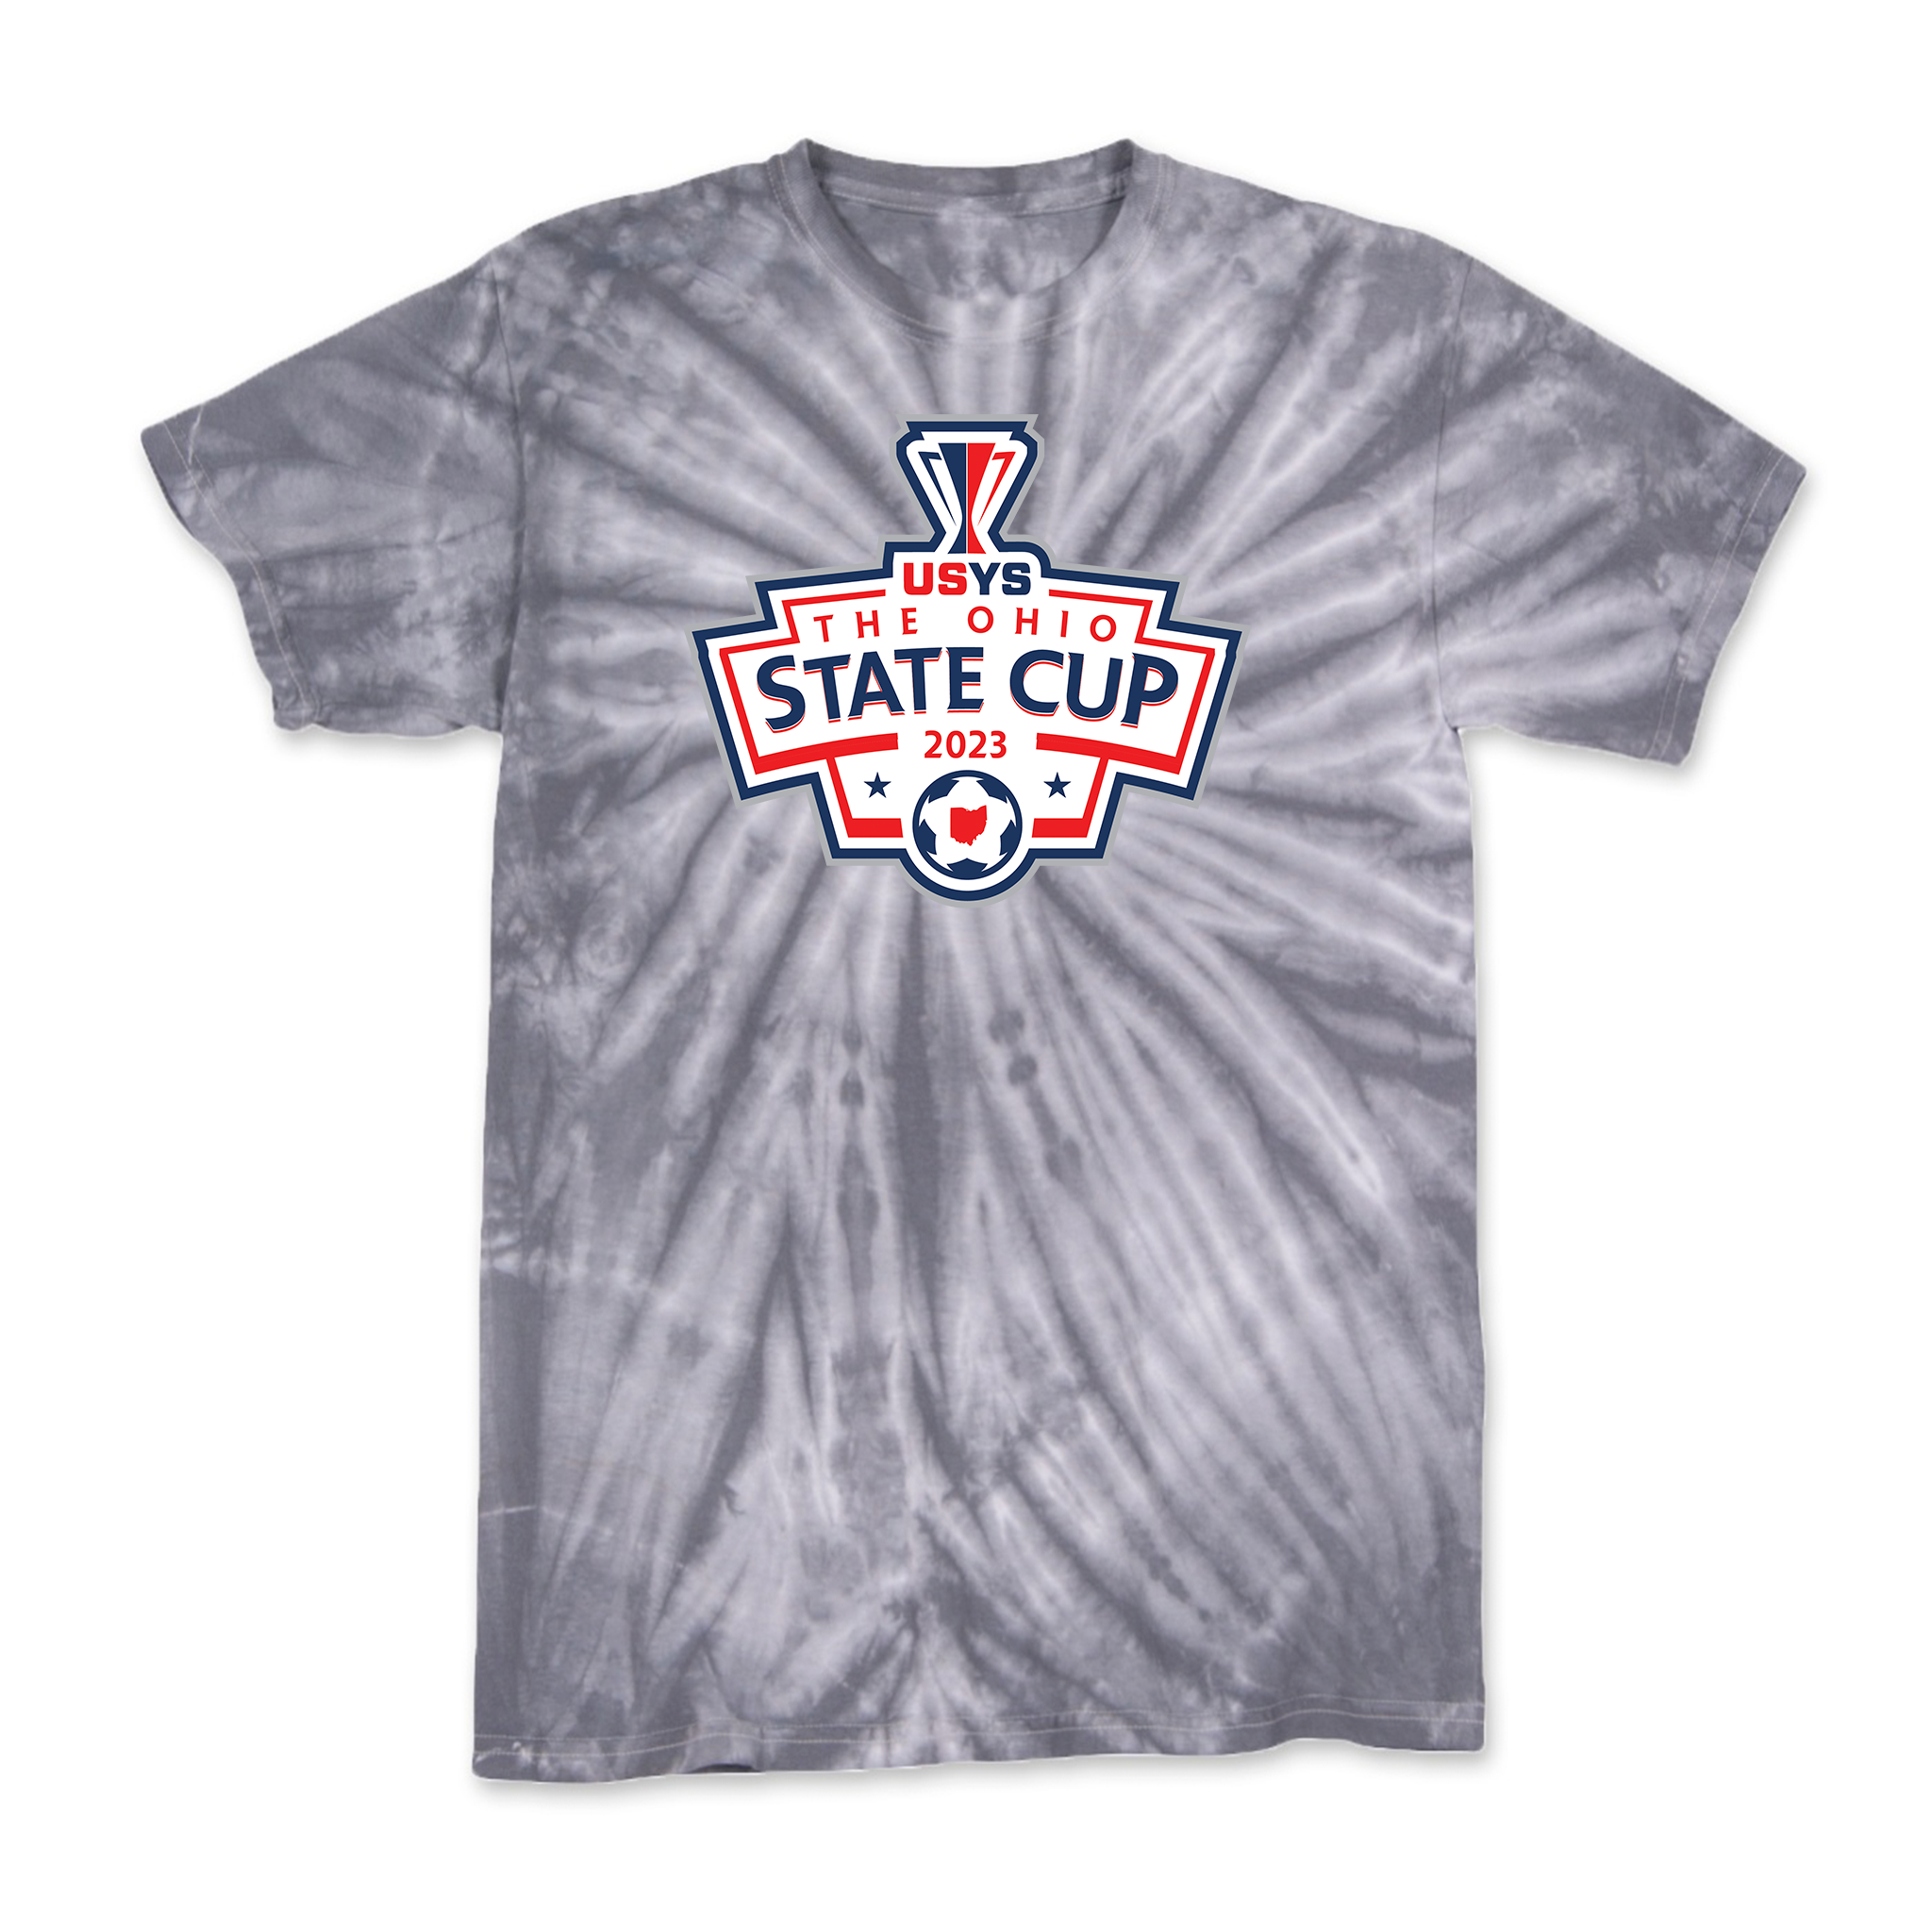 TIE-DYE SHORT SLEEVES - 2023 USYS The Ohio State Cup